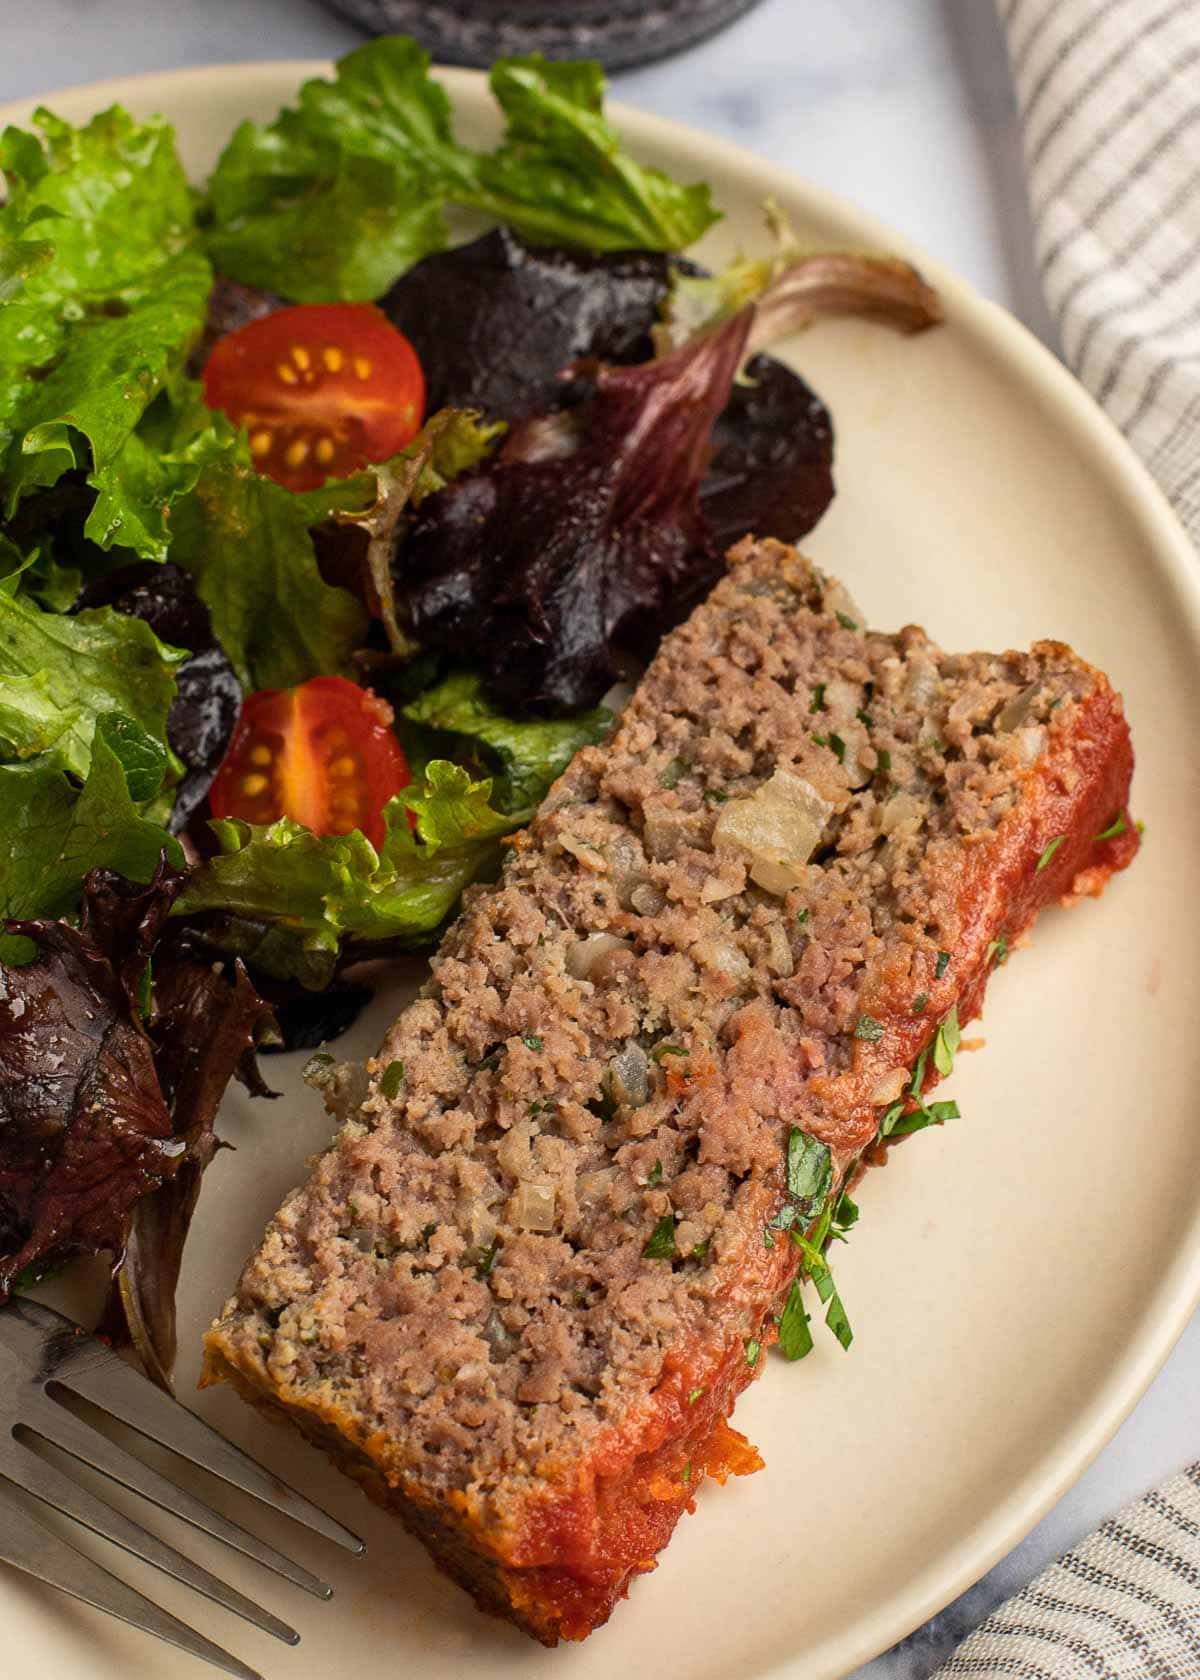 A piece of meatloaf on a plate next to a salad